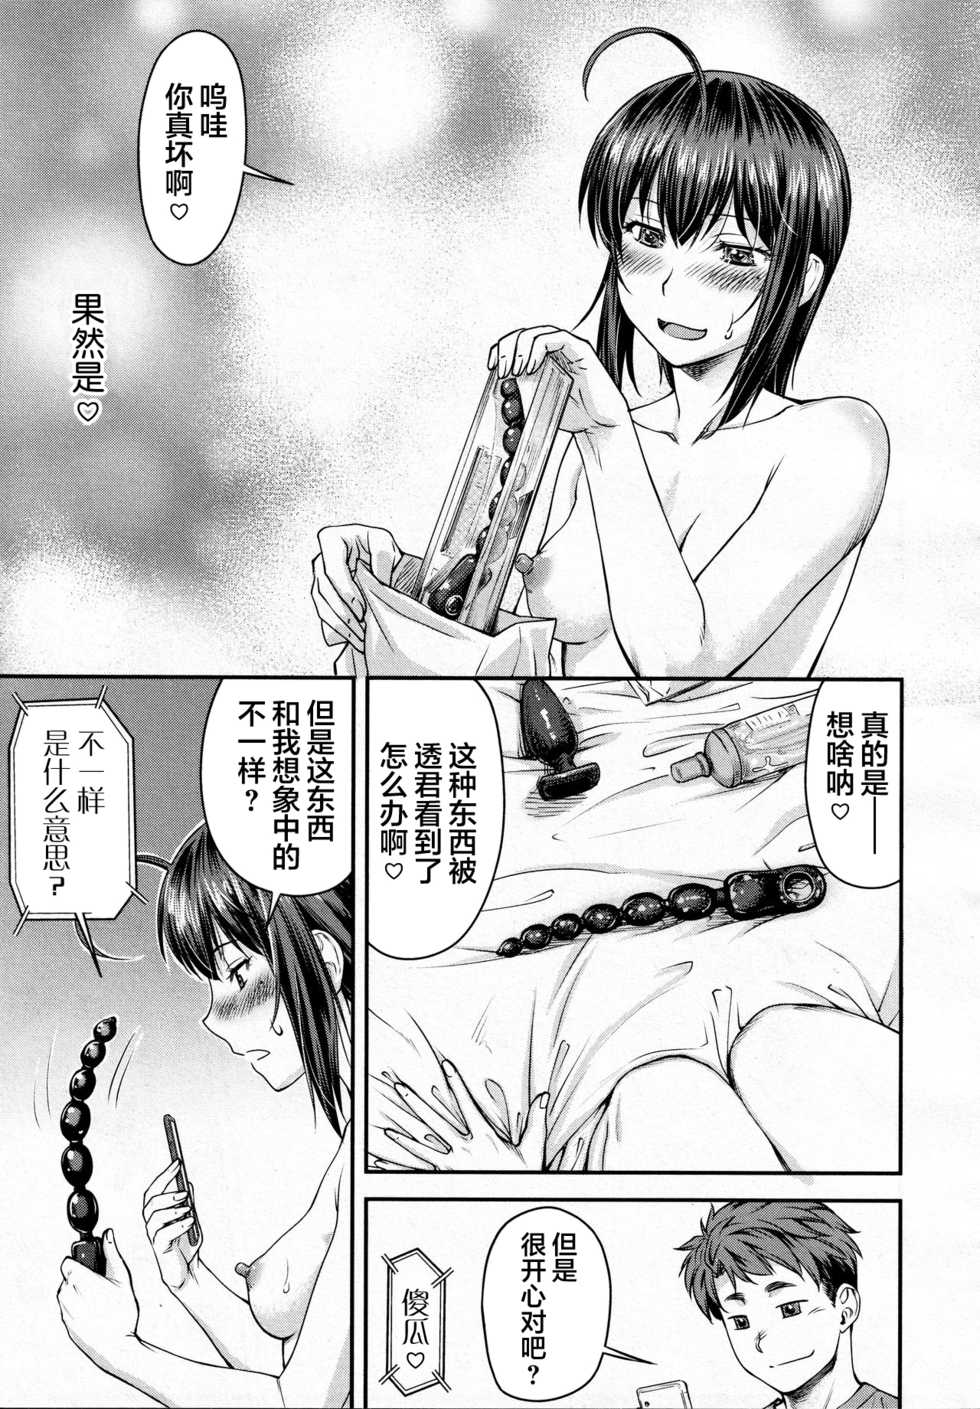 [Nagare Ippon] Kaname Date #11 (COMIC AUN 2020-12) [Chinese] [不可视汉化] [Digital] - Page 12